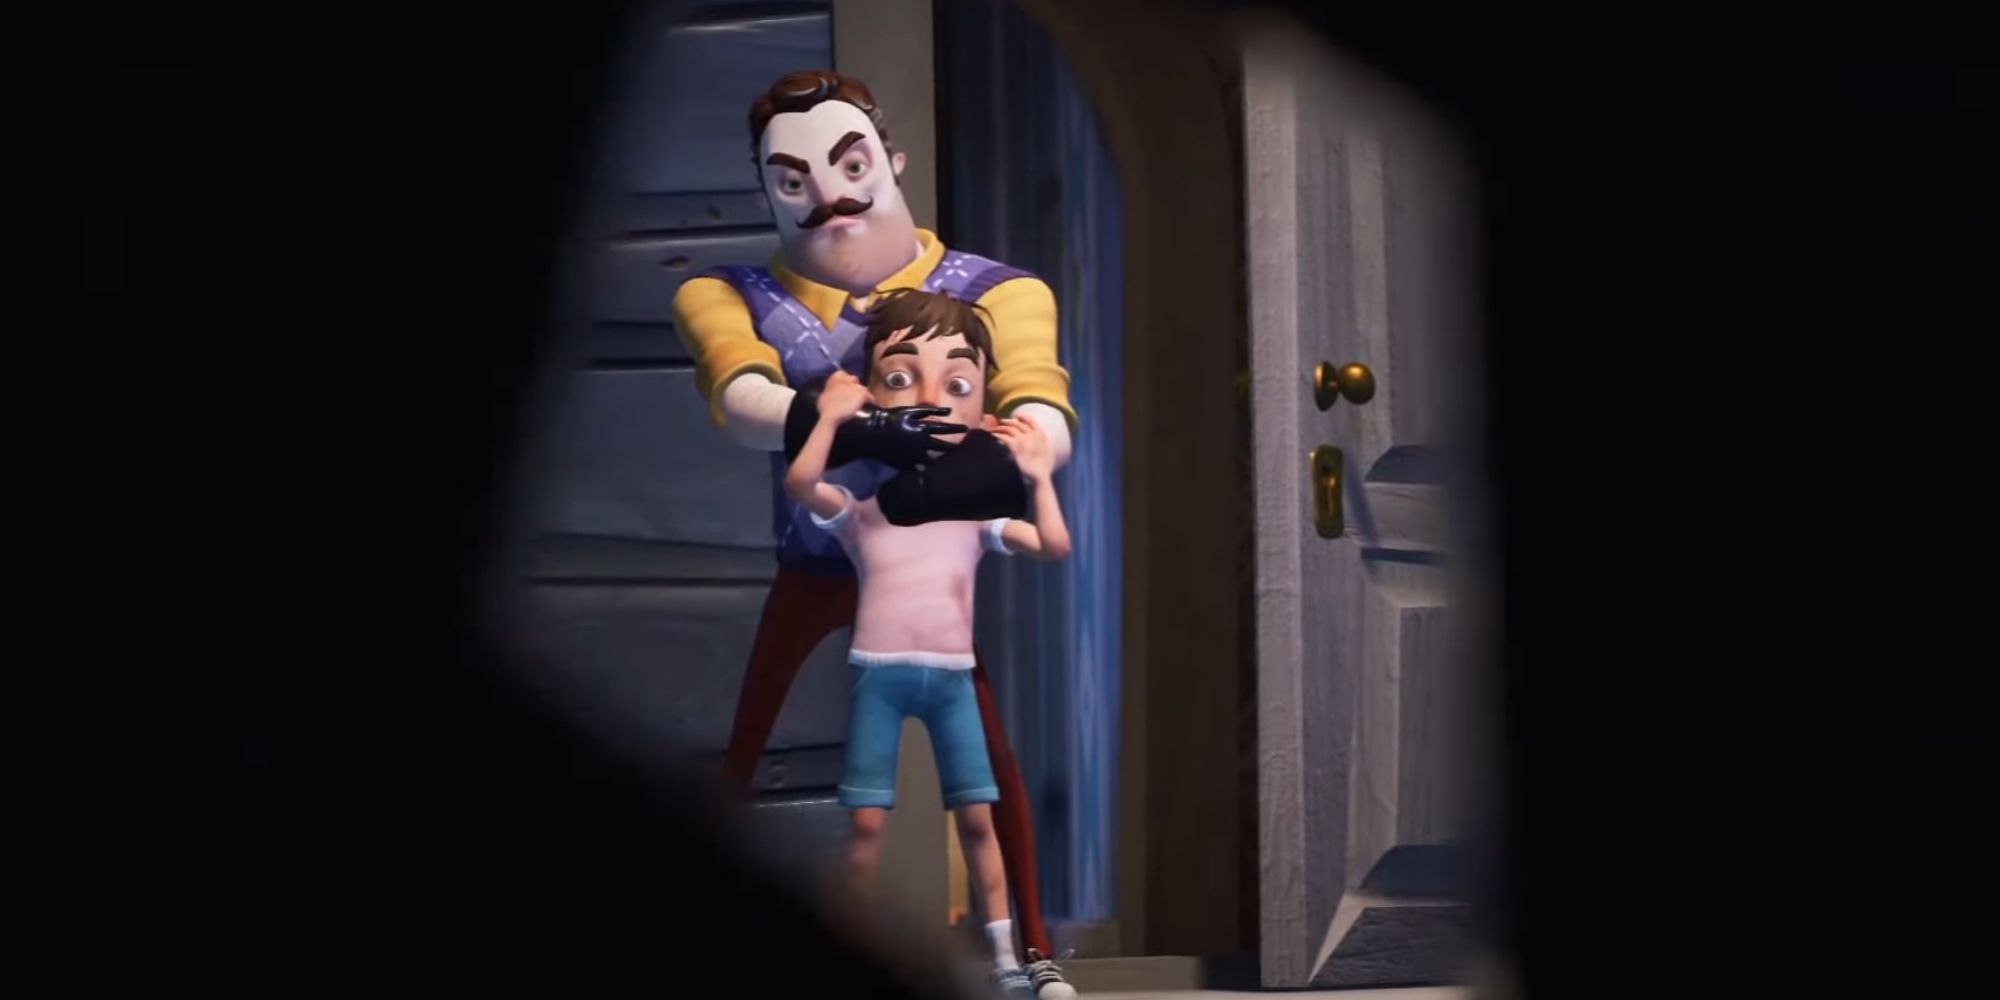 A neighbor holding his hand as he drags a little boy to his house.  This event is watched by the protagonist through binoculars.